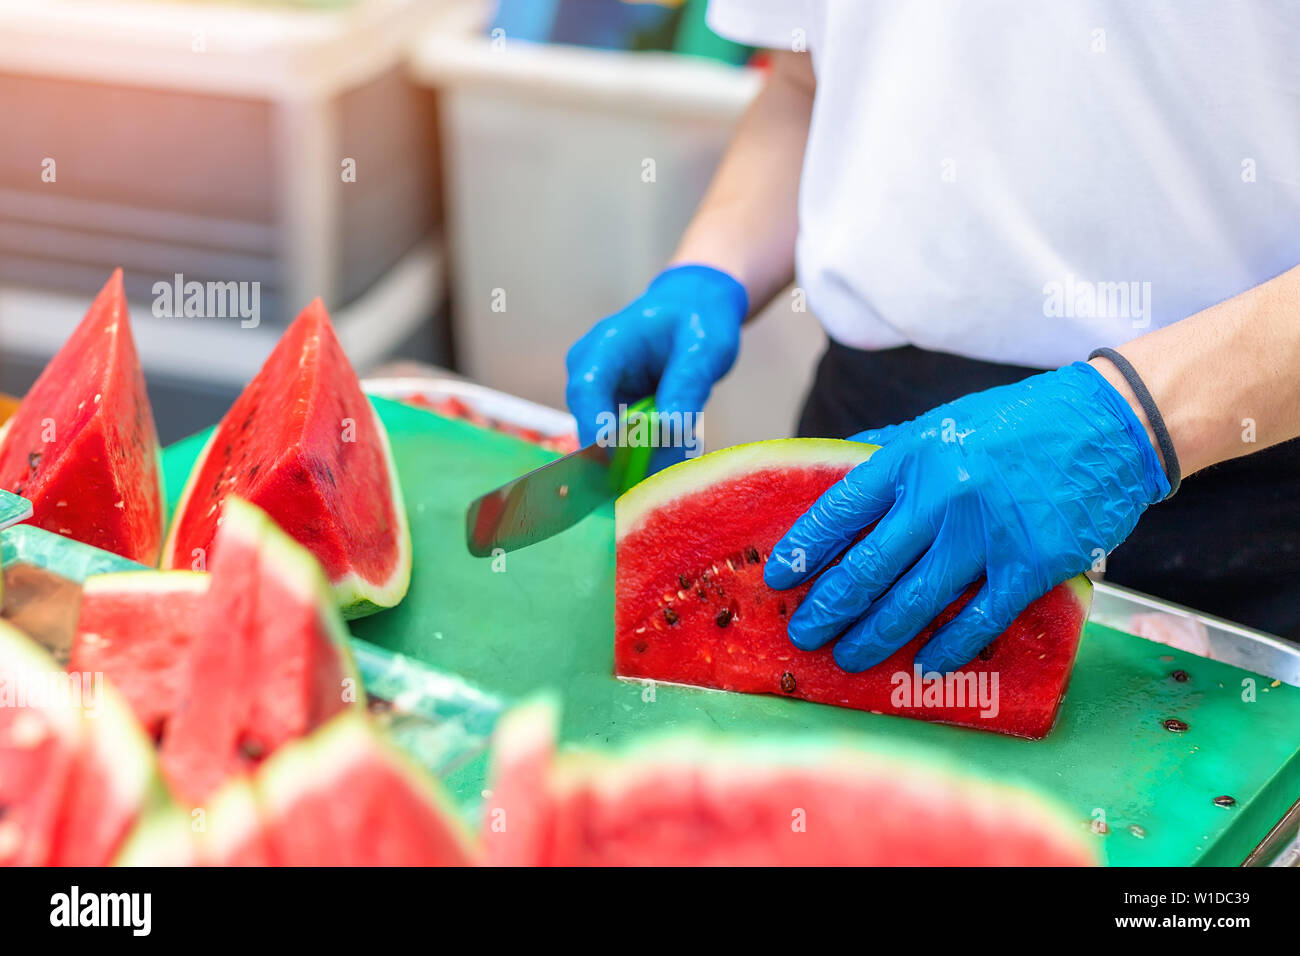 Cook in rubber gloves peeling and slicing gresh tasty juicy sliced watermelon for hotel guests at tropical resort outdoors Stock Photo